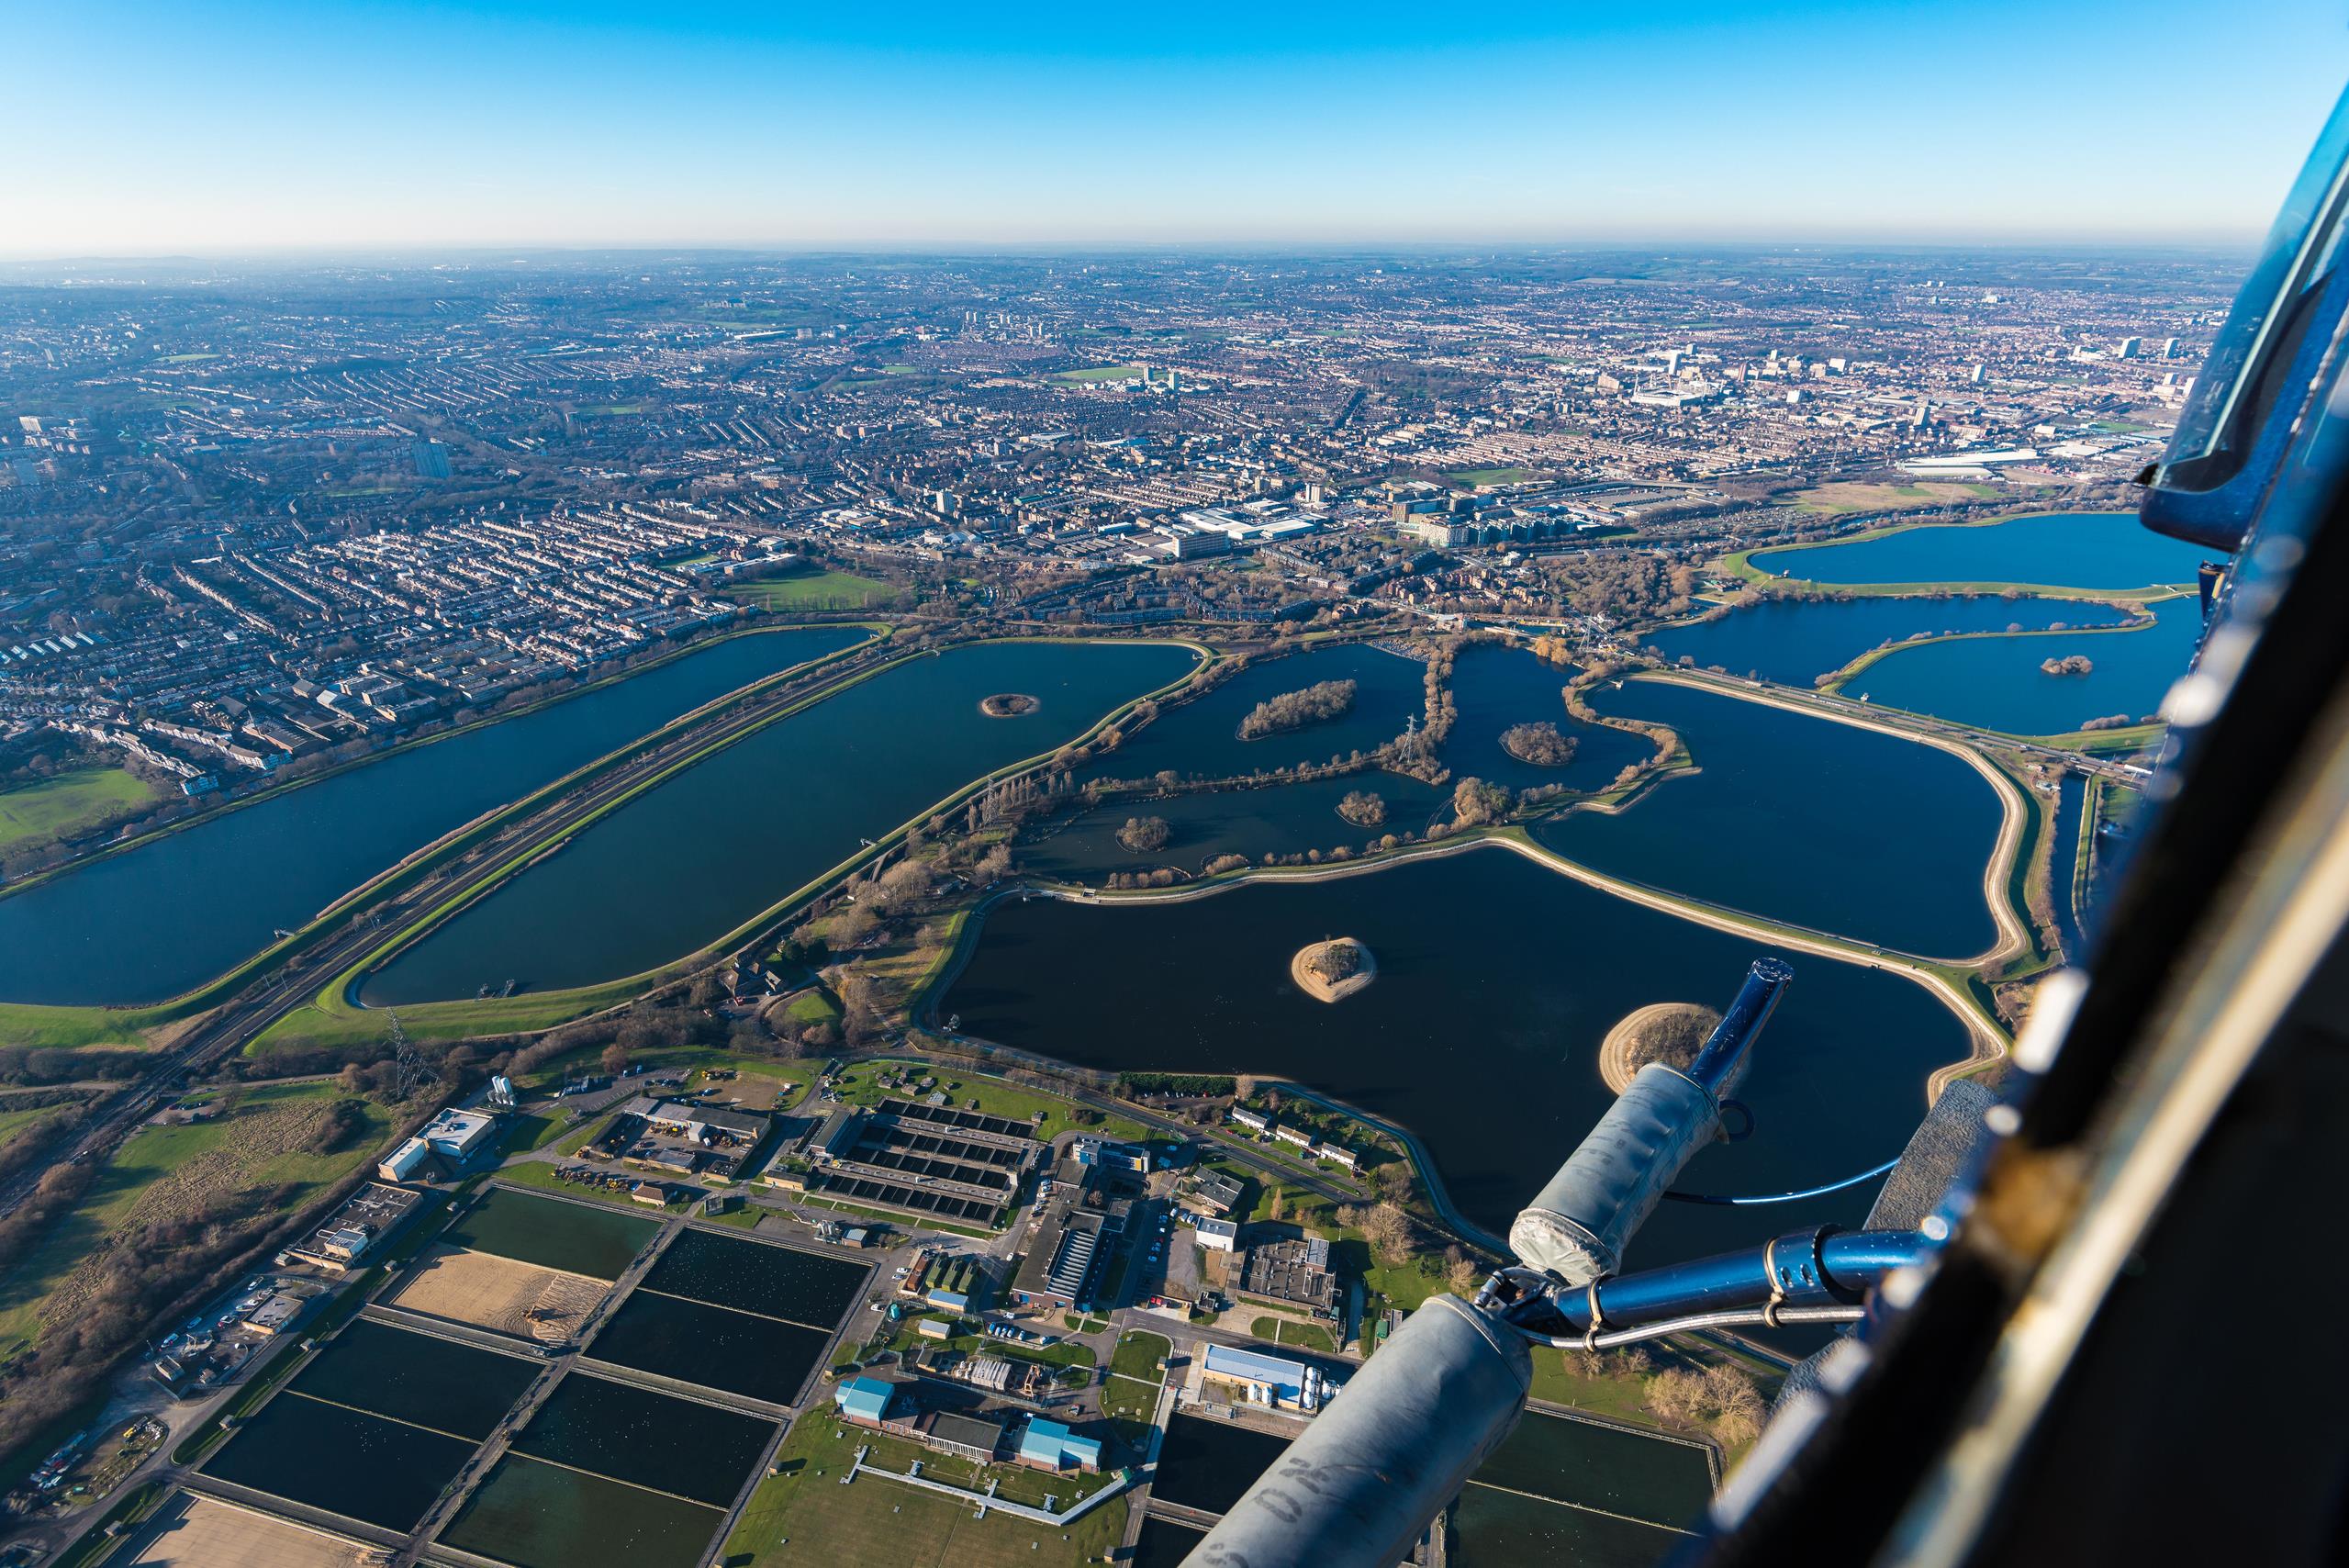 An aerial view of the Thames Valley water works in London